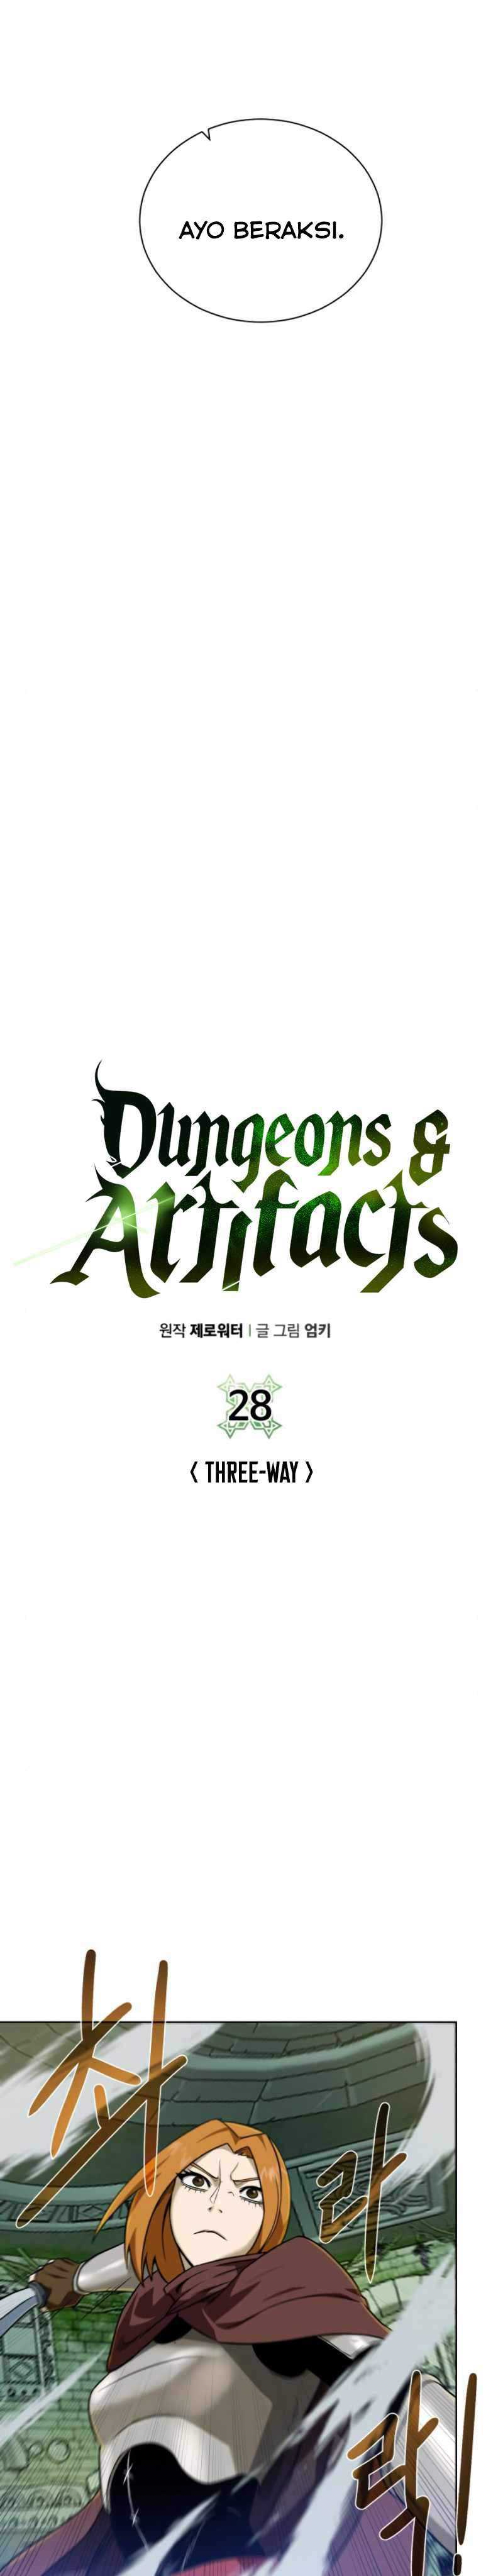 dungeons-artifacts Chapter chapter-28